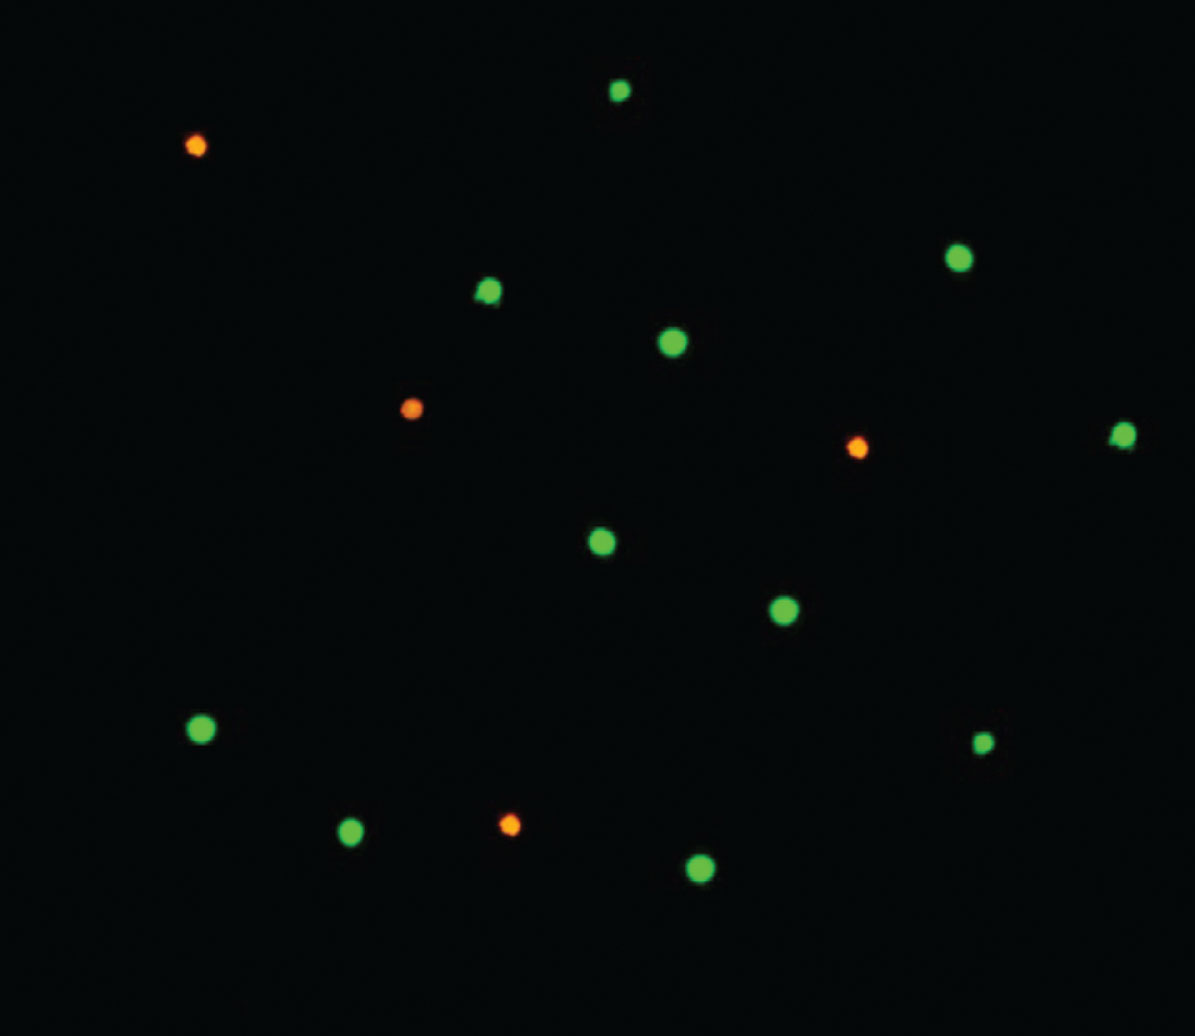 FDA/EtBr viability assay. Cell viability evaluation with the fluorescein diacetate and ethidium bromide differential staining method visualized in fluorescence microscope (magnification 100×). The green labelled cells are metabolically active and the red labelled cells are considered as dead.